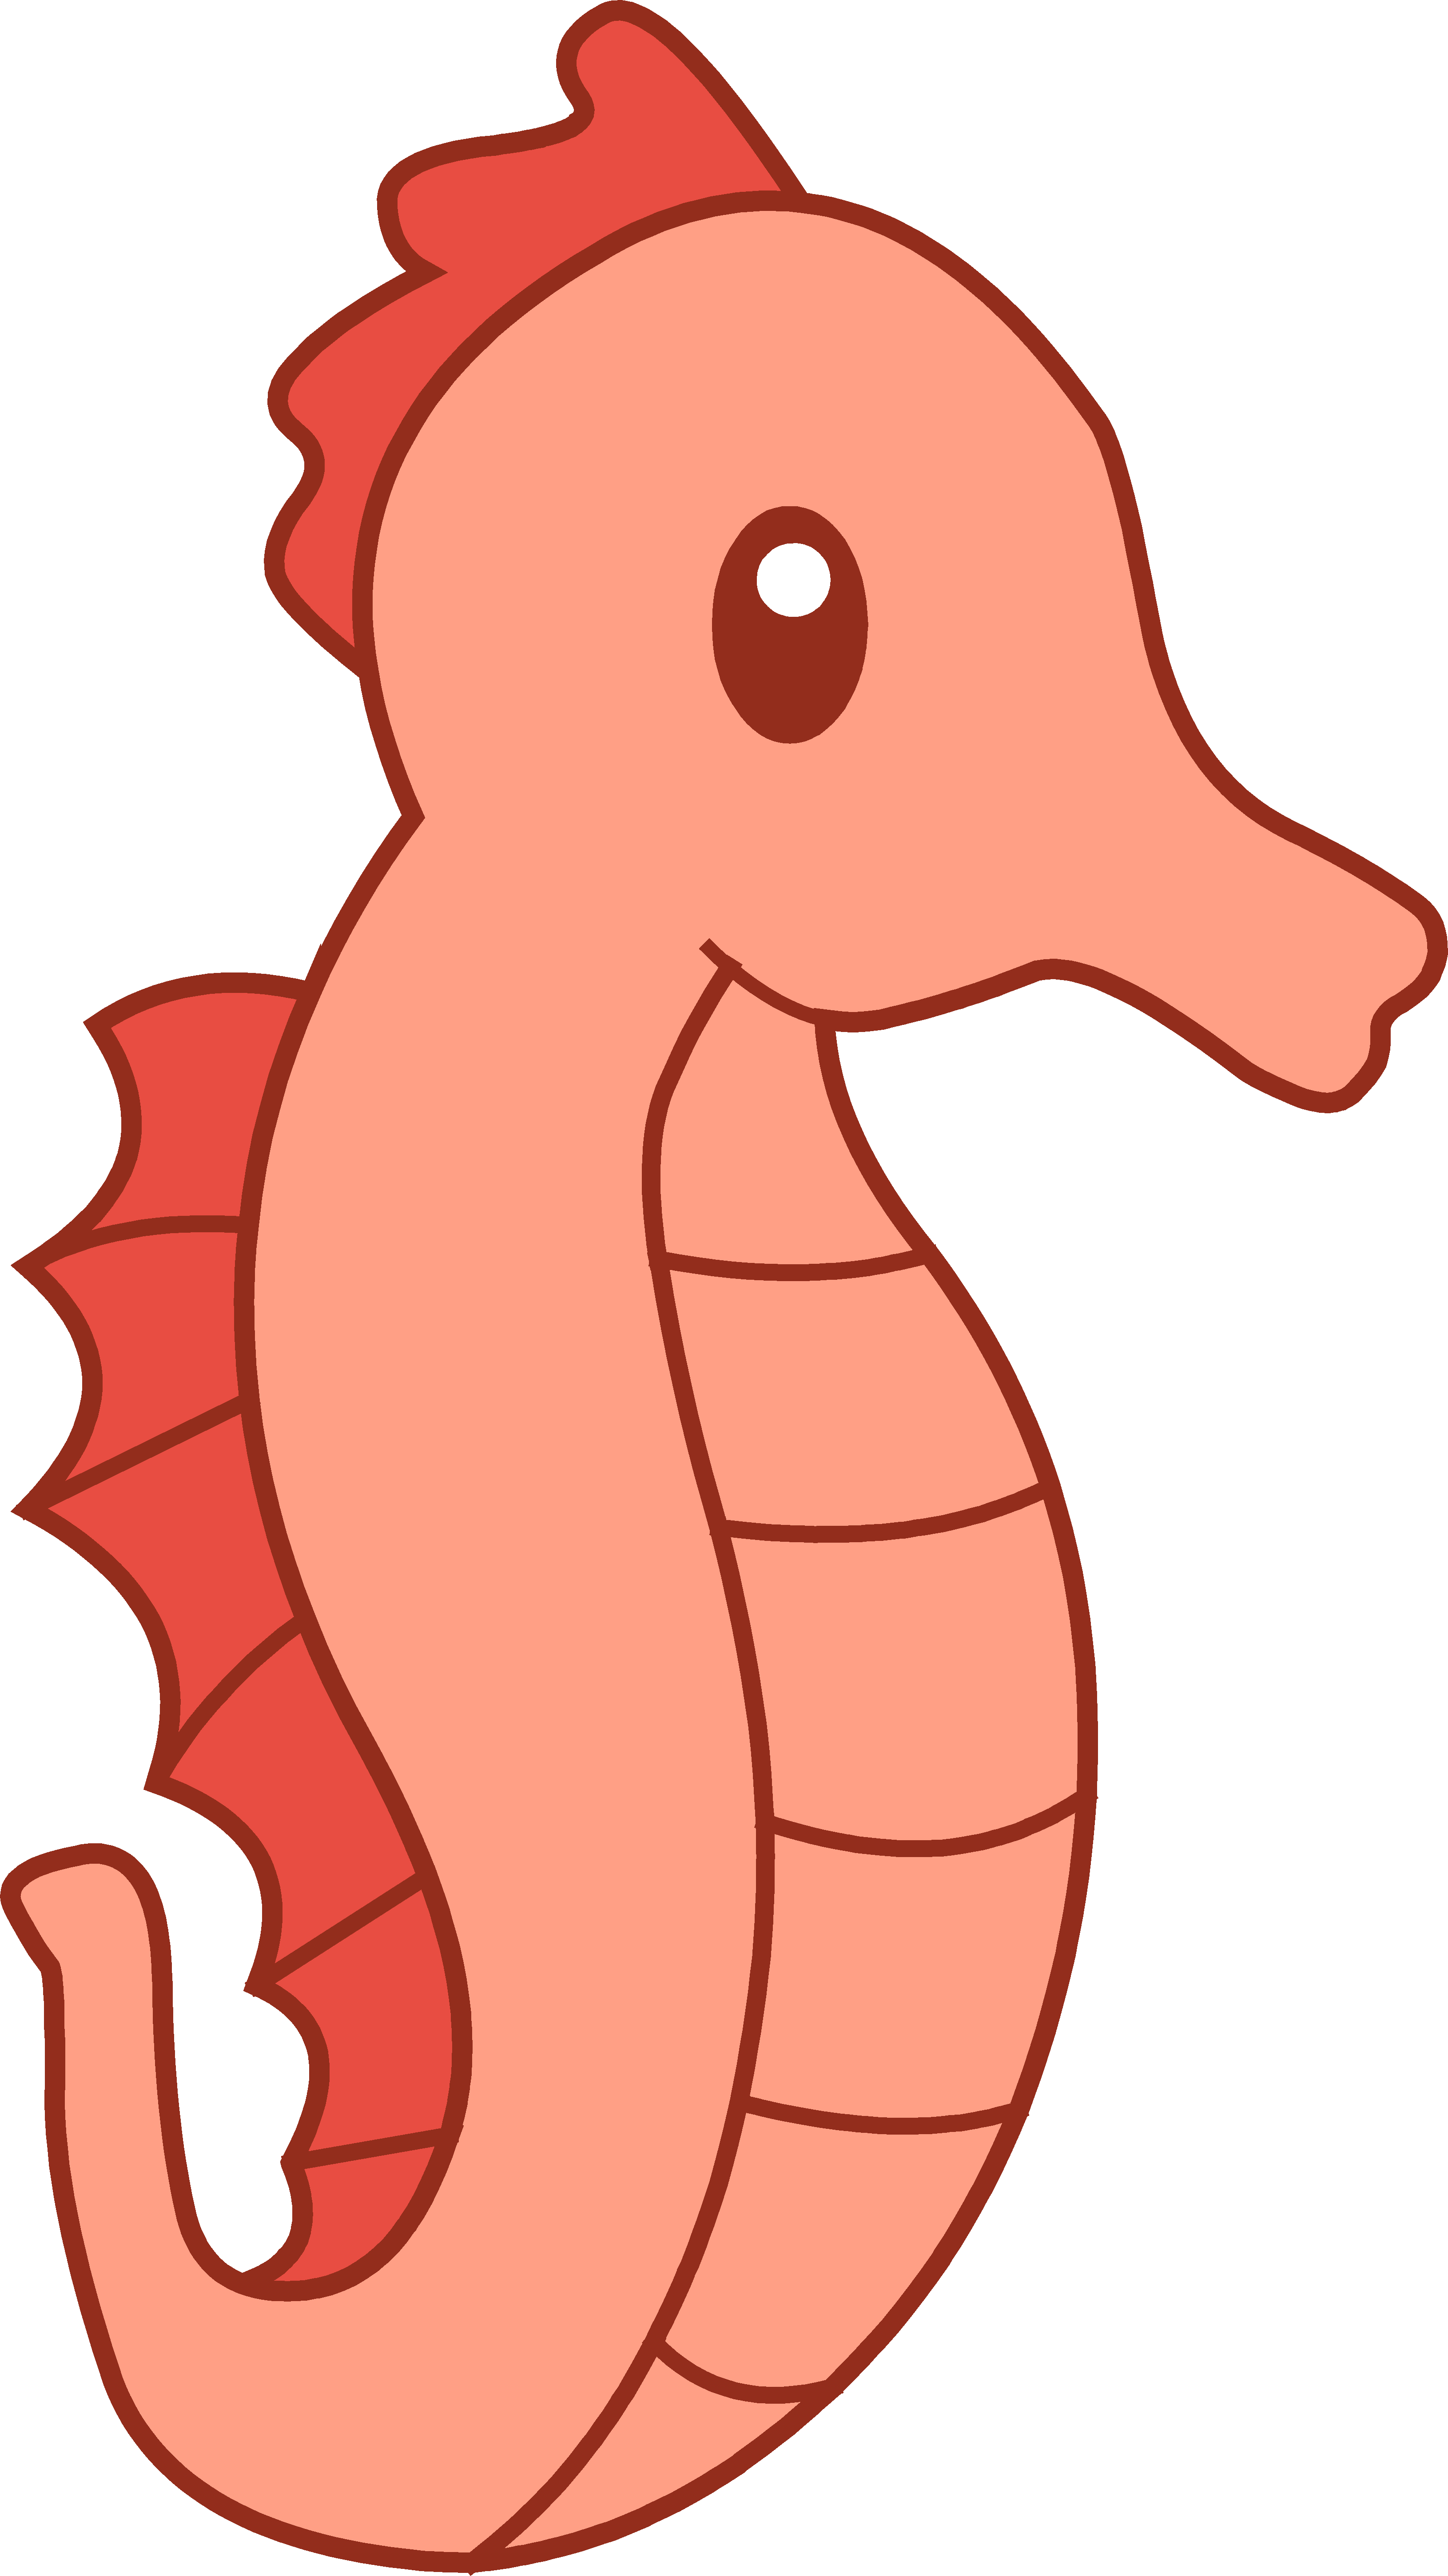 Baby Seahorse Clipart   Clipart Panda   Free Clipart Images